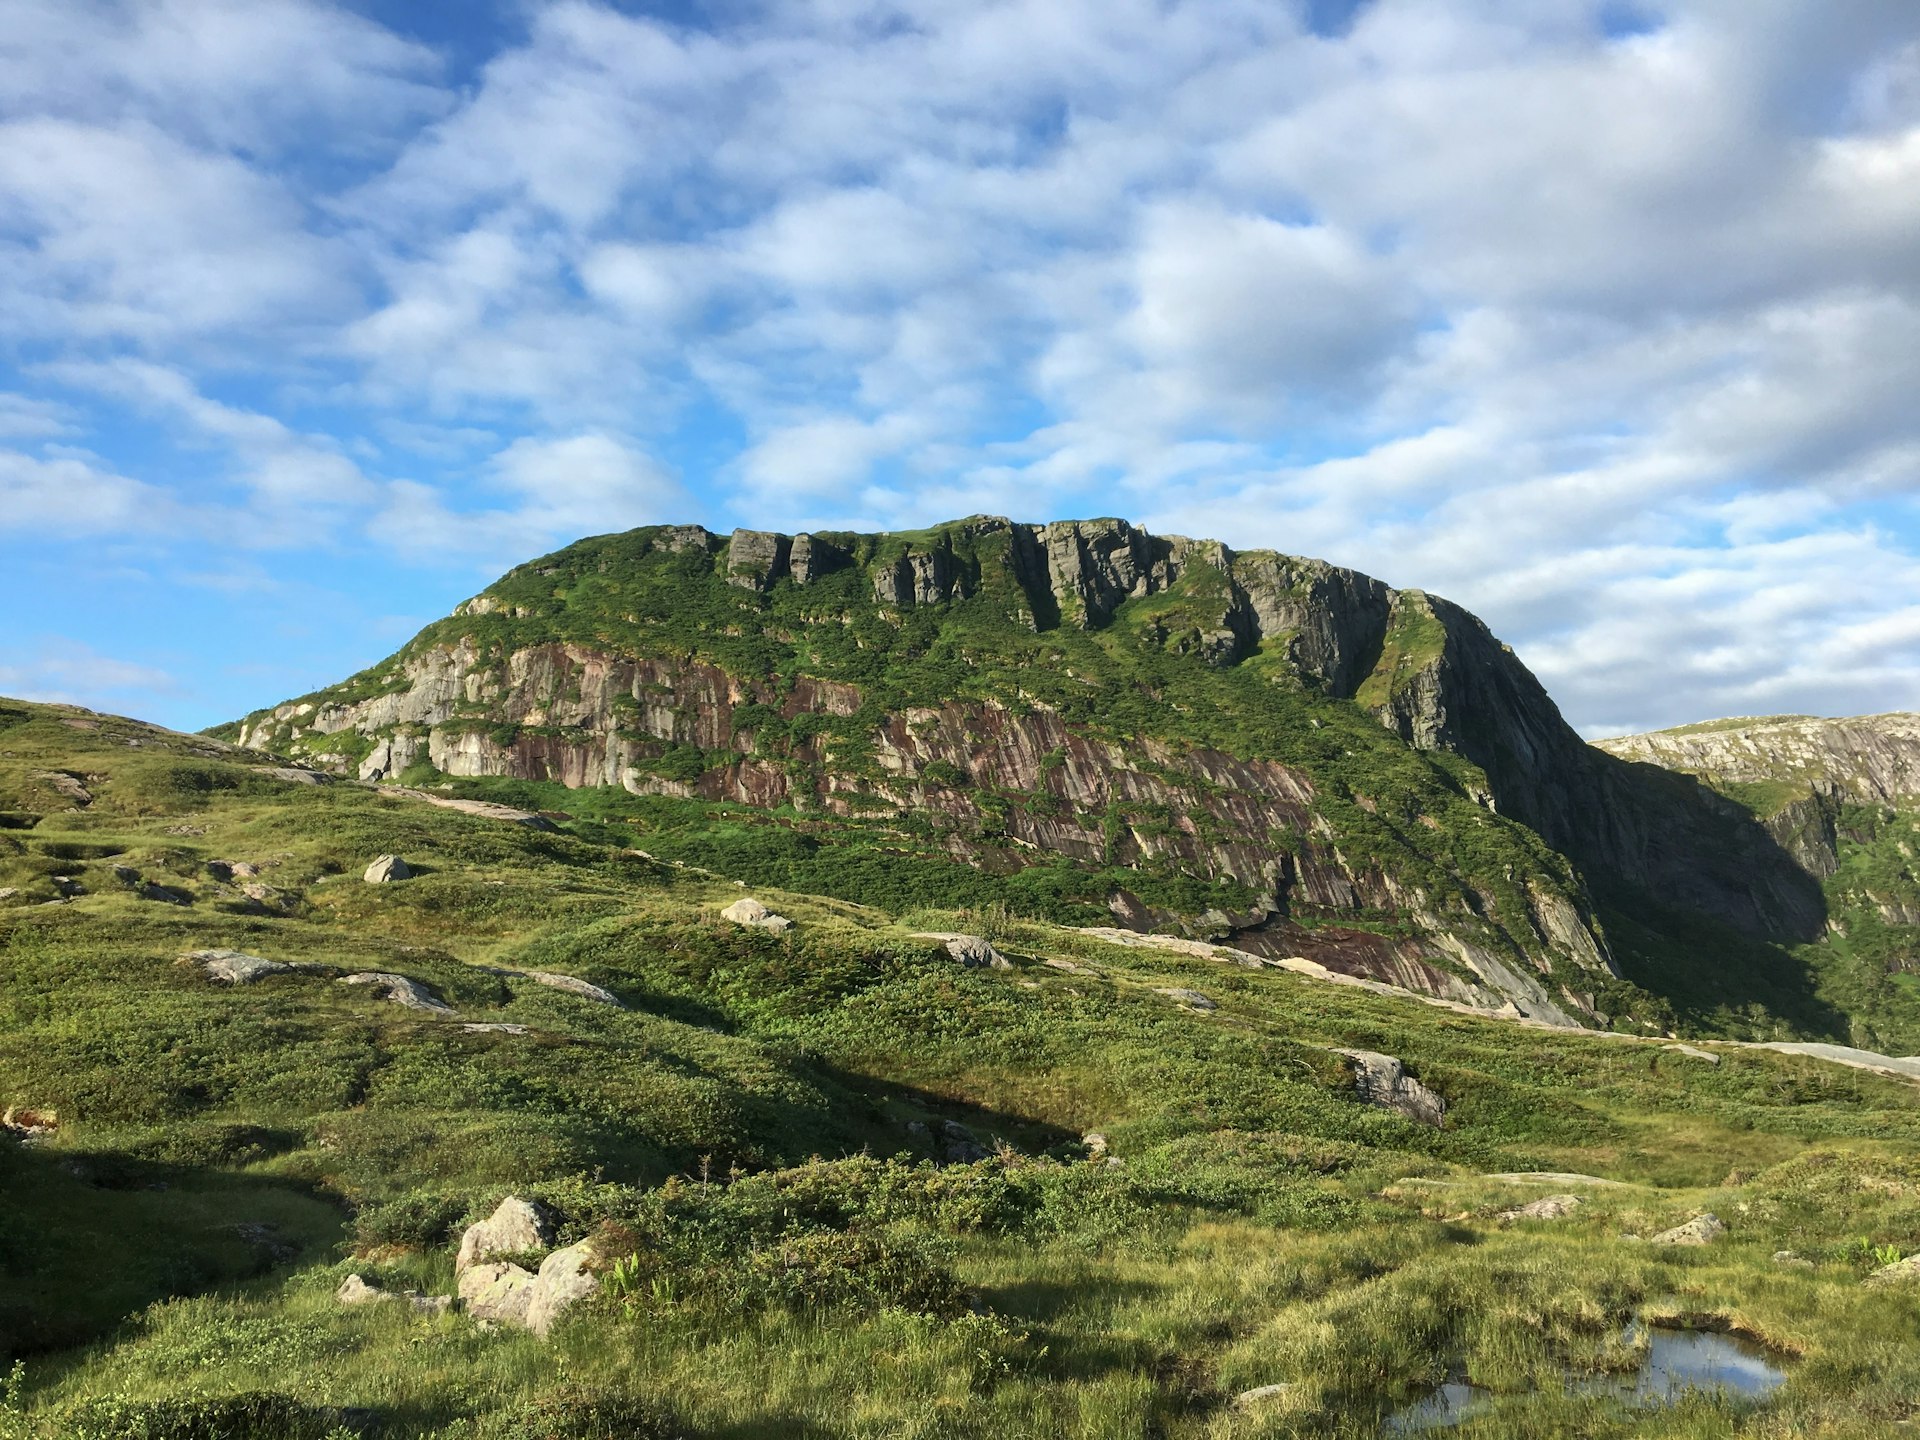 Lush green grass and moss covers rocky, rolling mountainsides in Gros Mourne National Park.